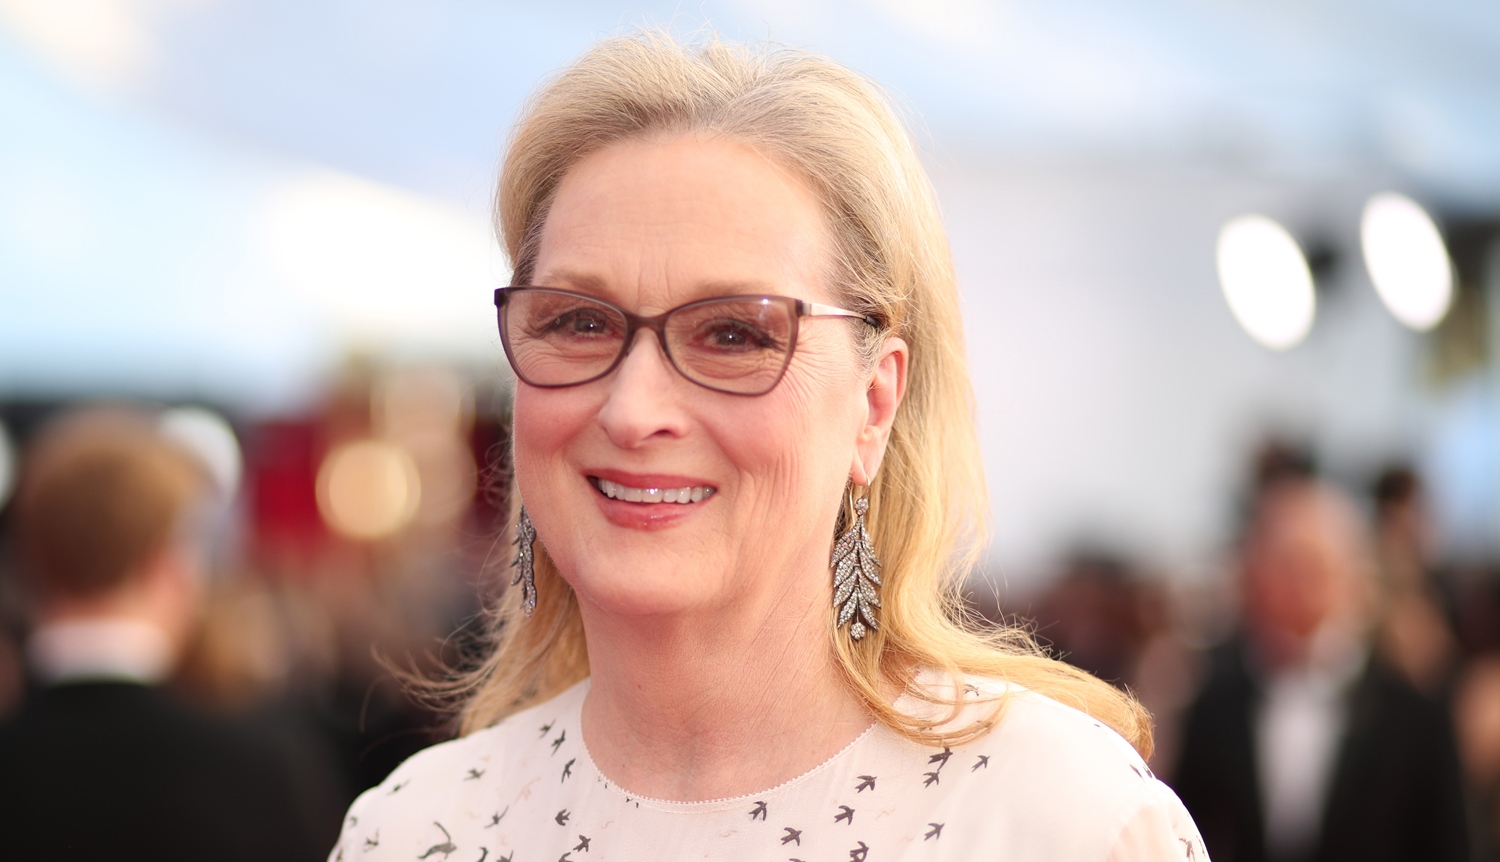 Get Your First Look at Meryl Streep in ‘Only Murders in the Building’